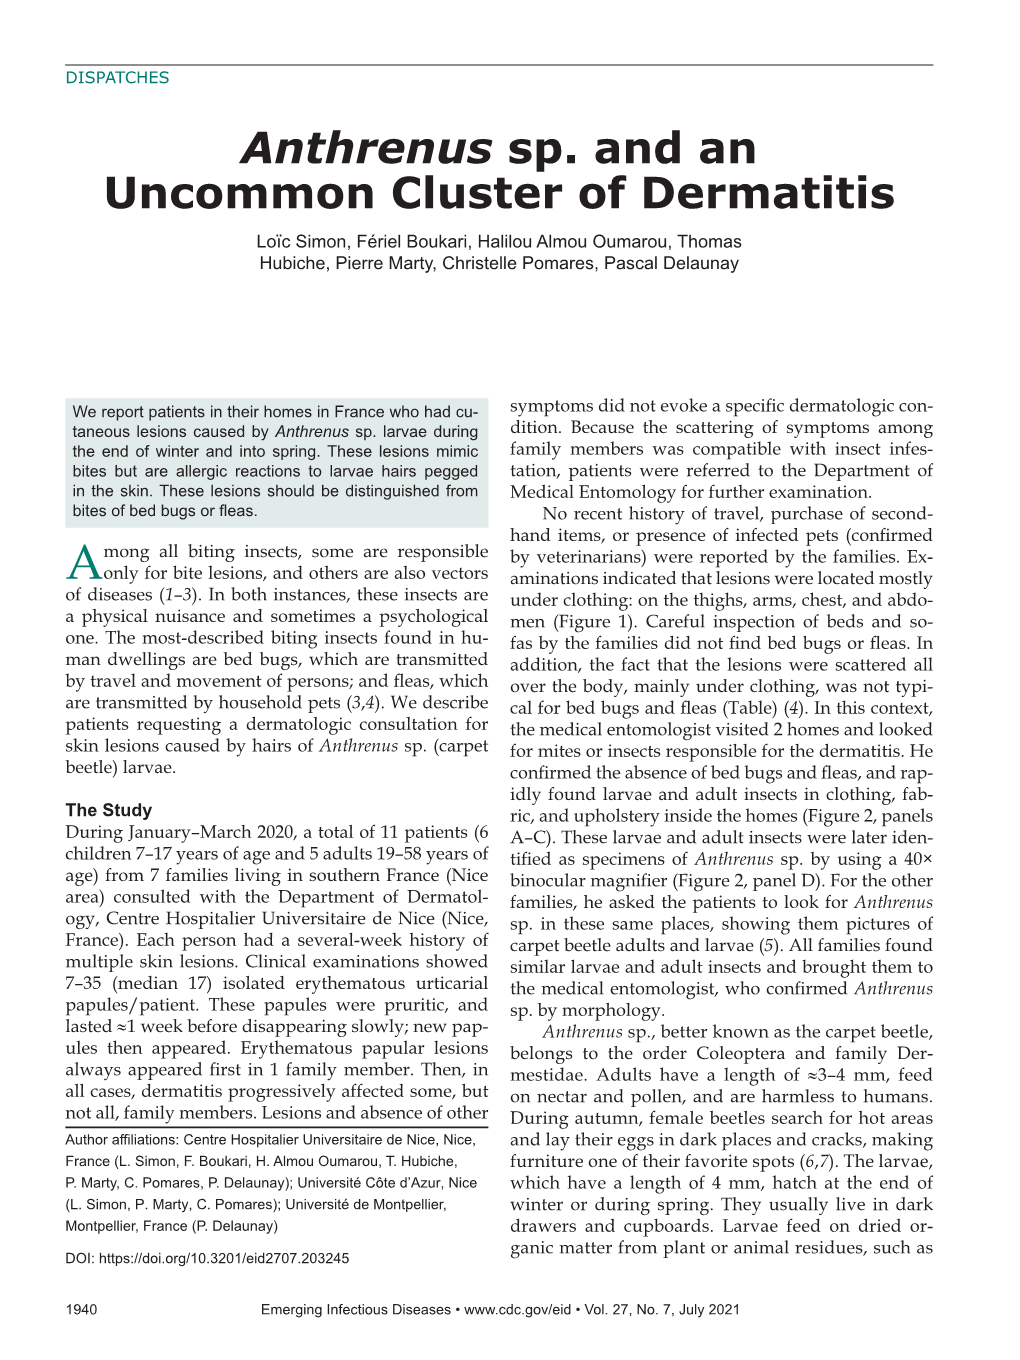 Anthrenus Sp. and an Uncommon Cluster of Dermatitis